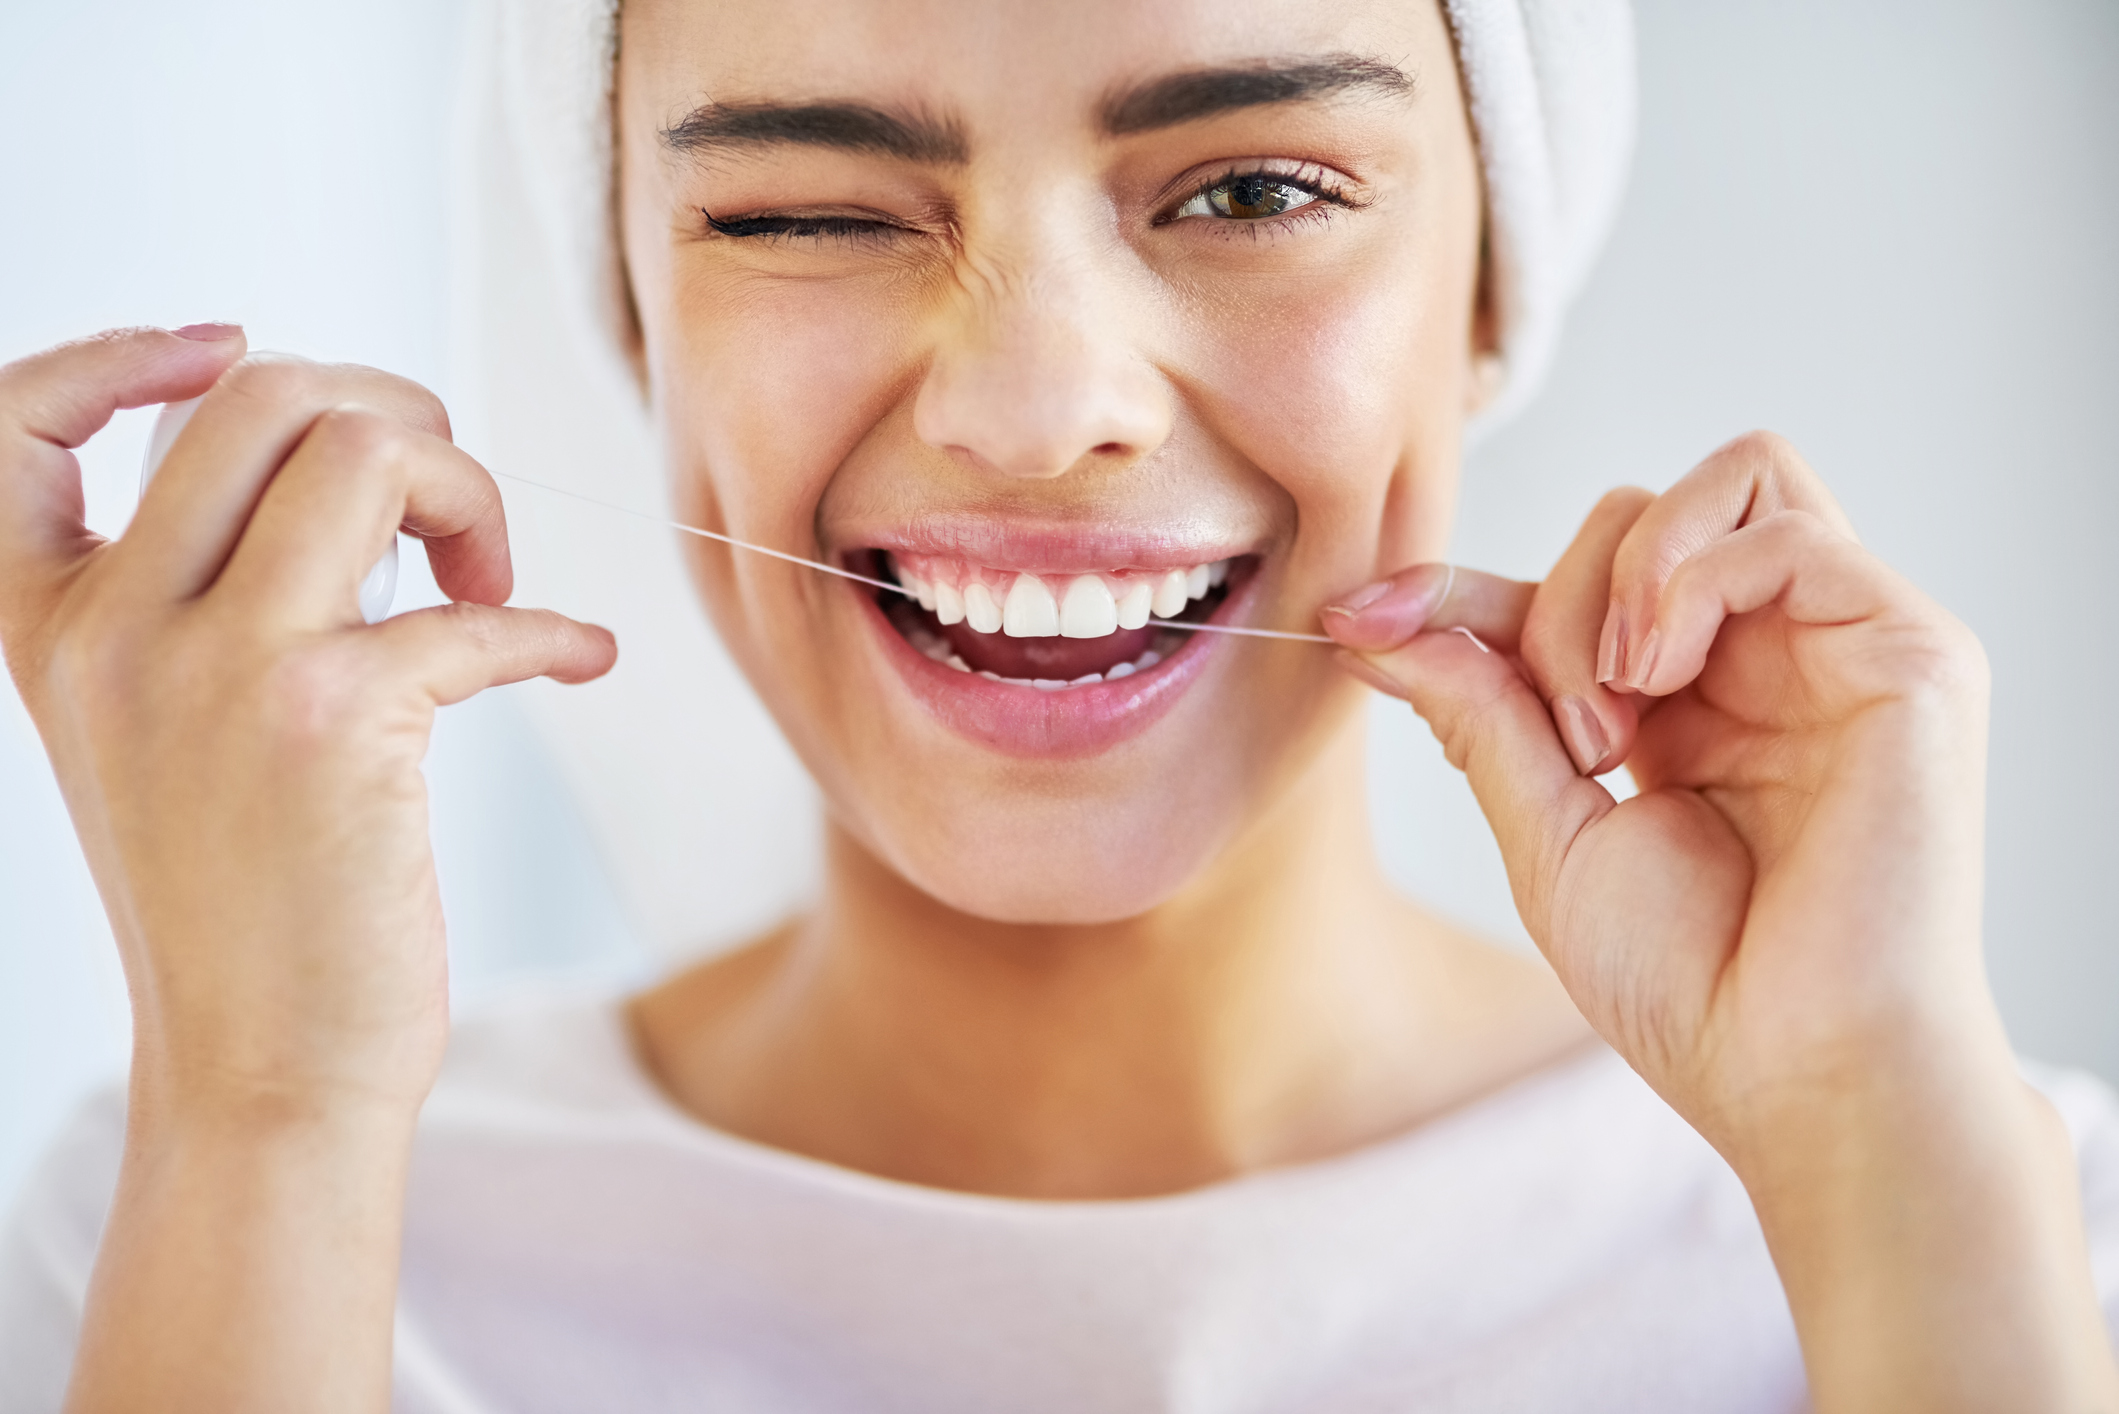 Three Easy Steps To Take When Flossing Your Teeth